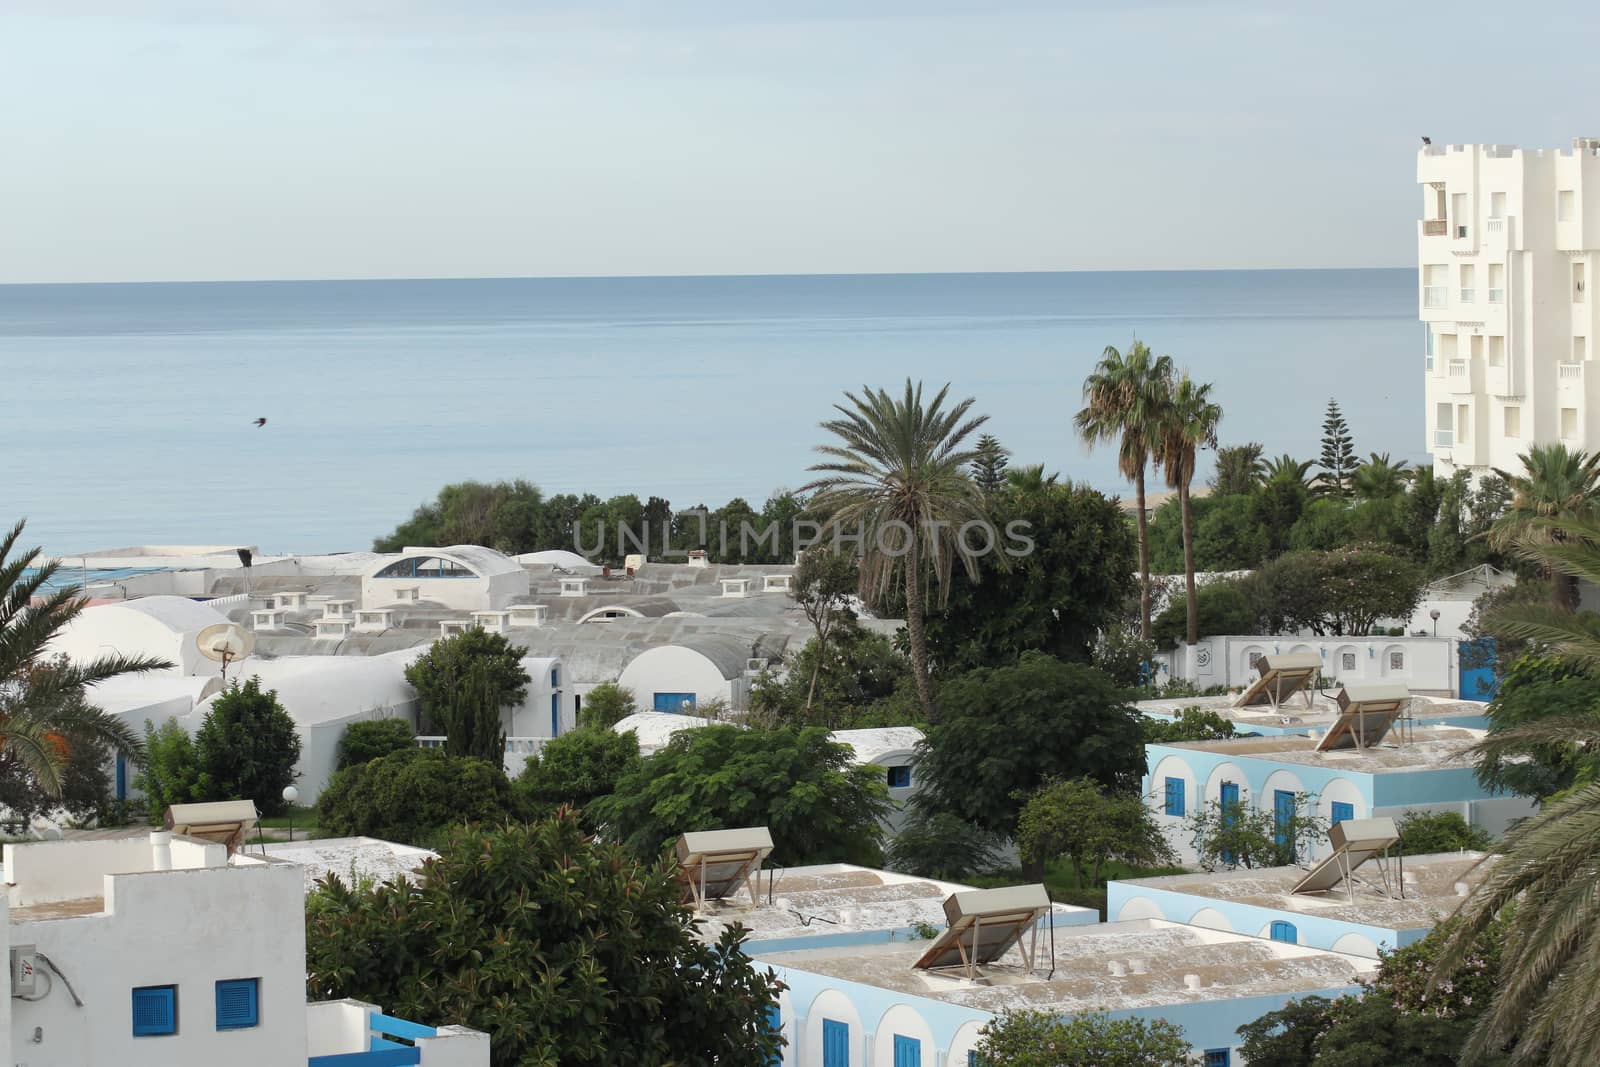 View of the houses by the sea in Tunisia by Kasia_Lawrynowicz